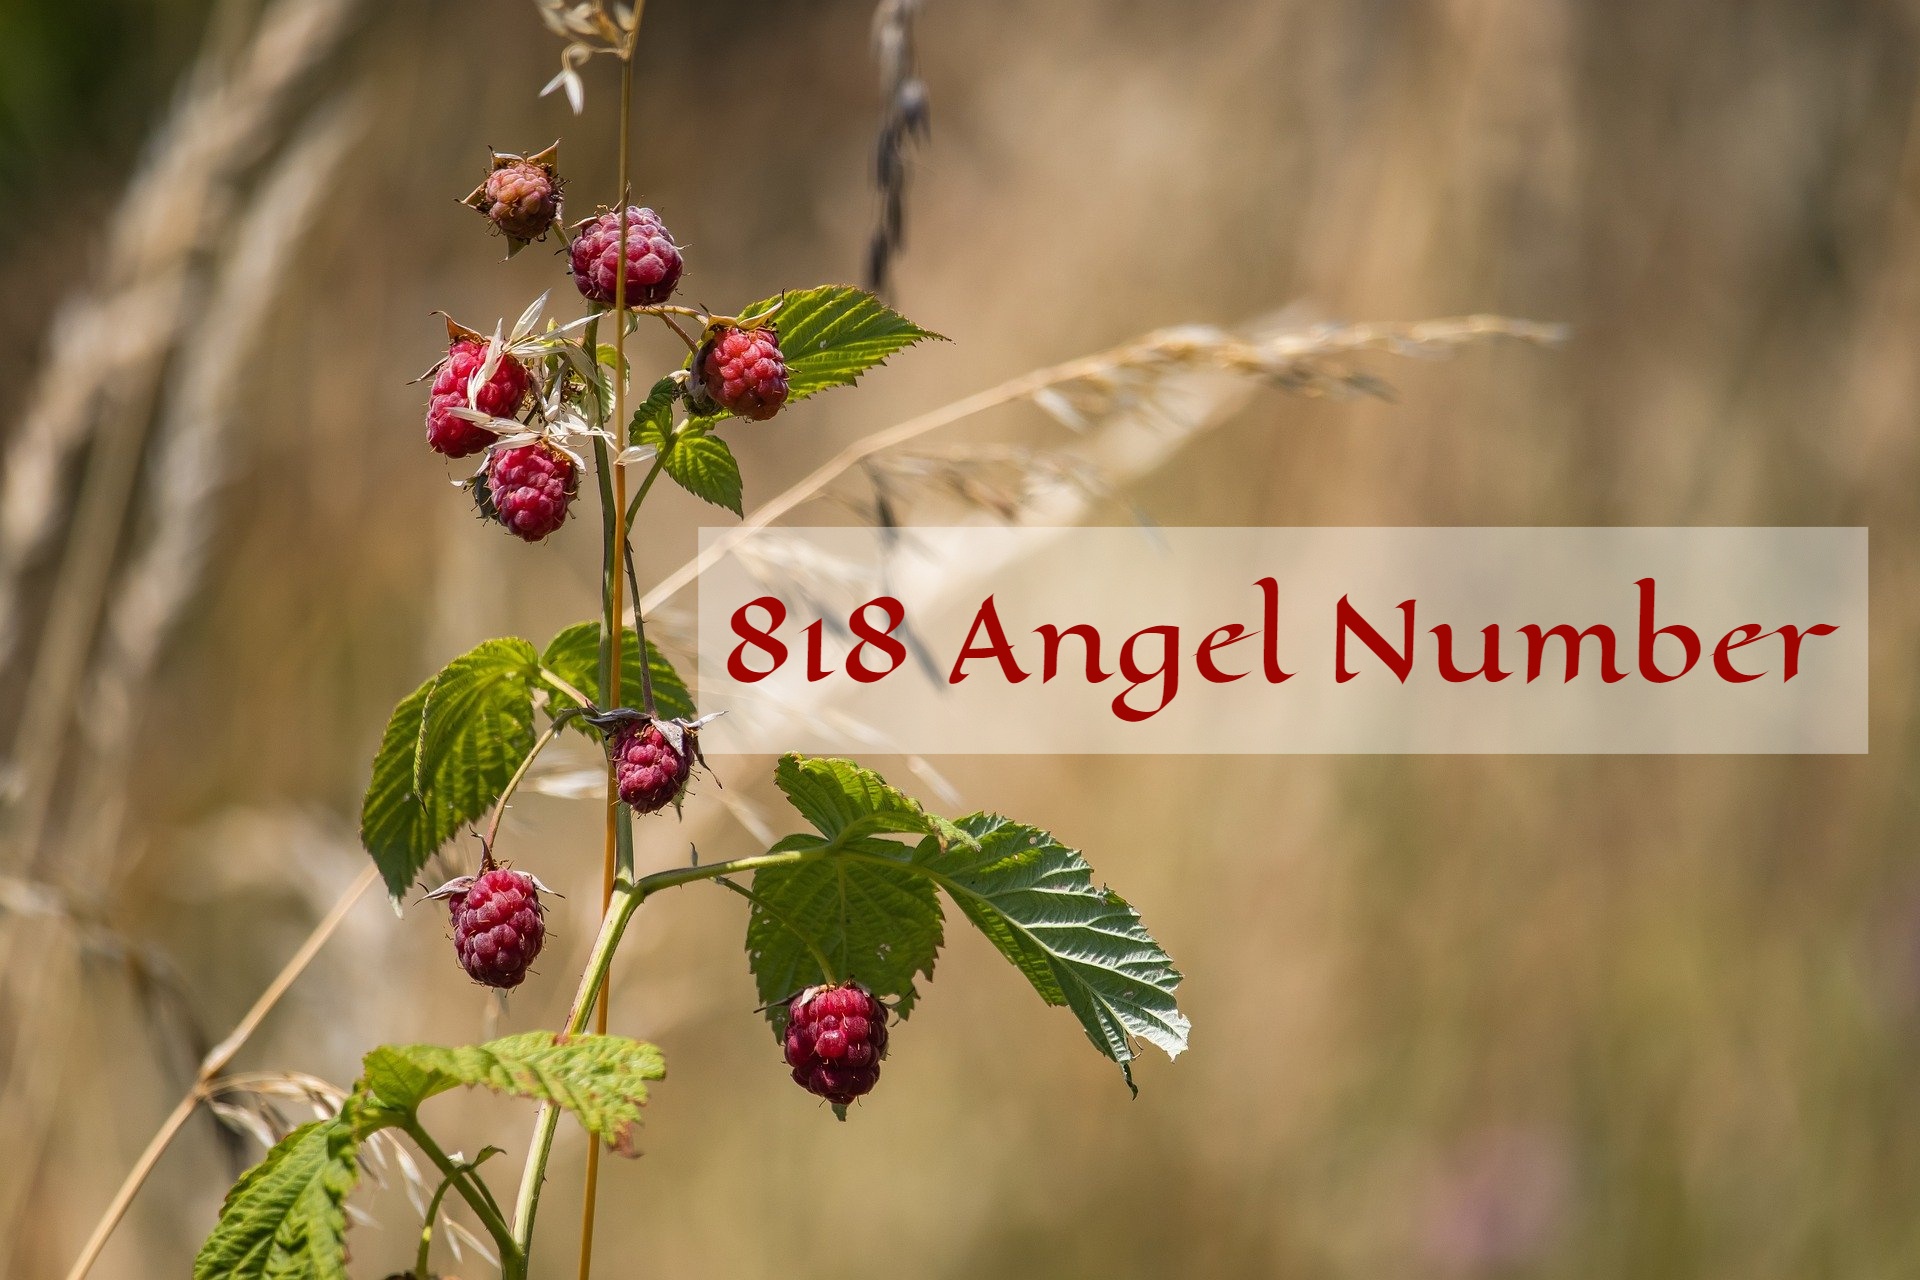 818 Angel Number - A Sign Of Impending Transformation